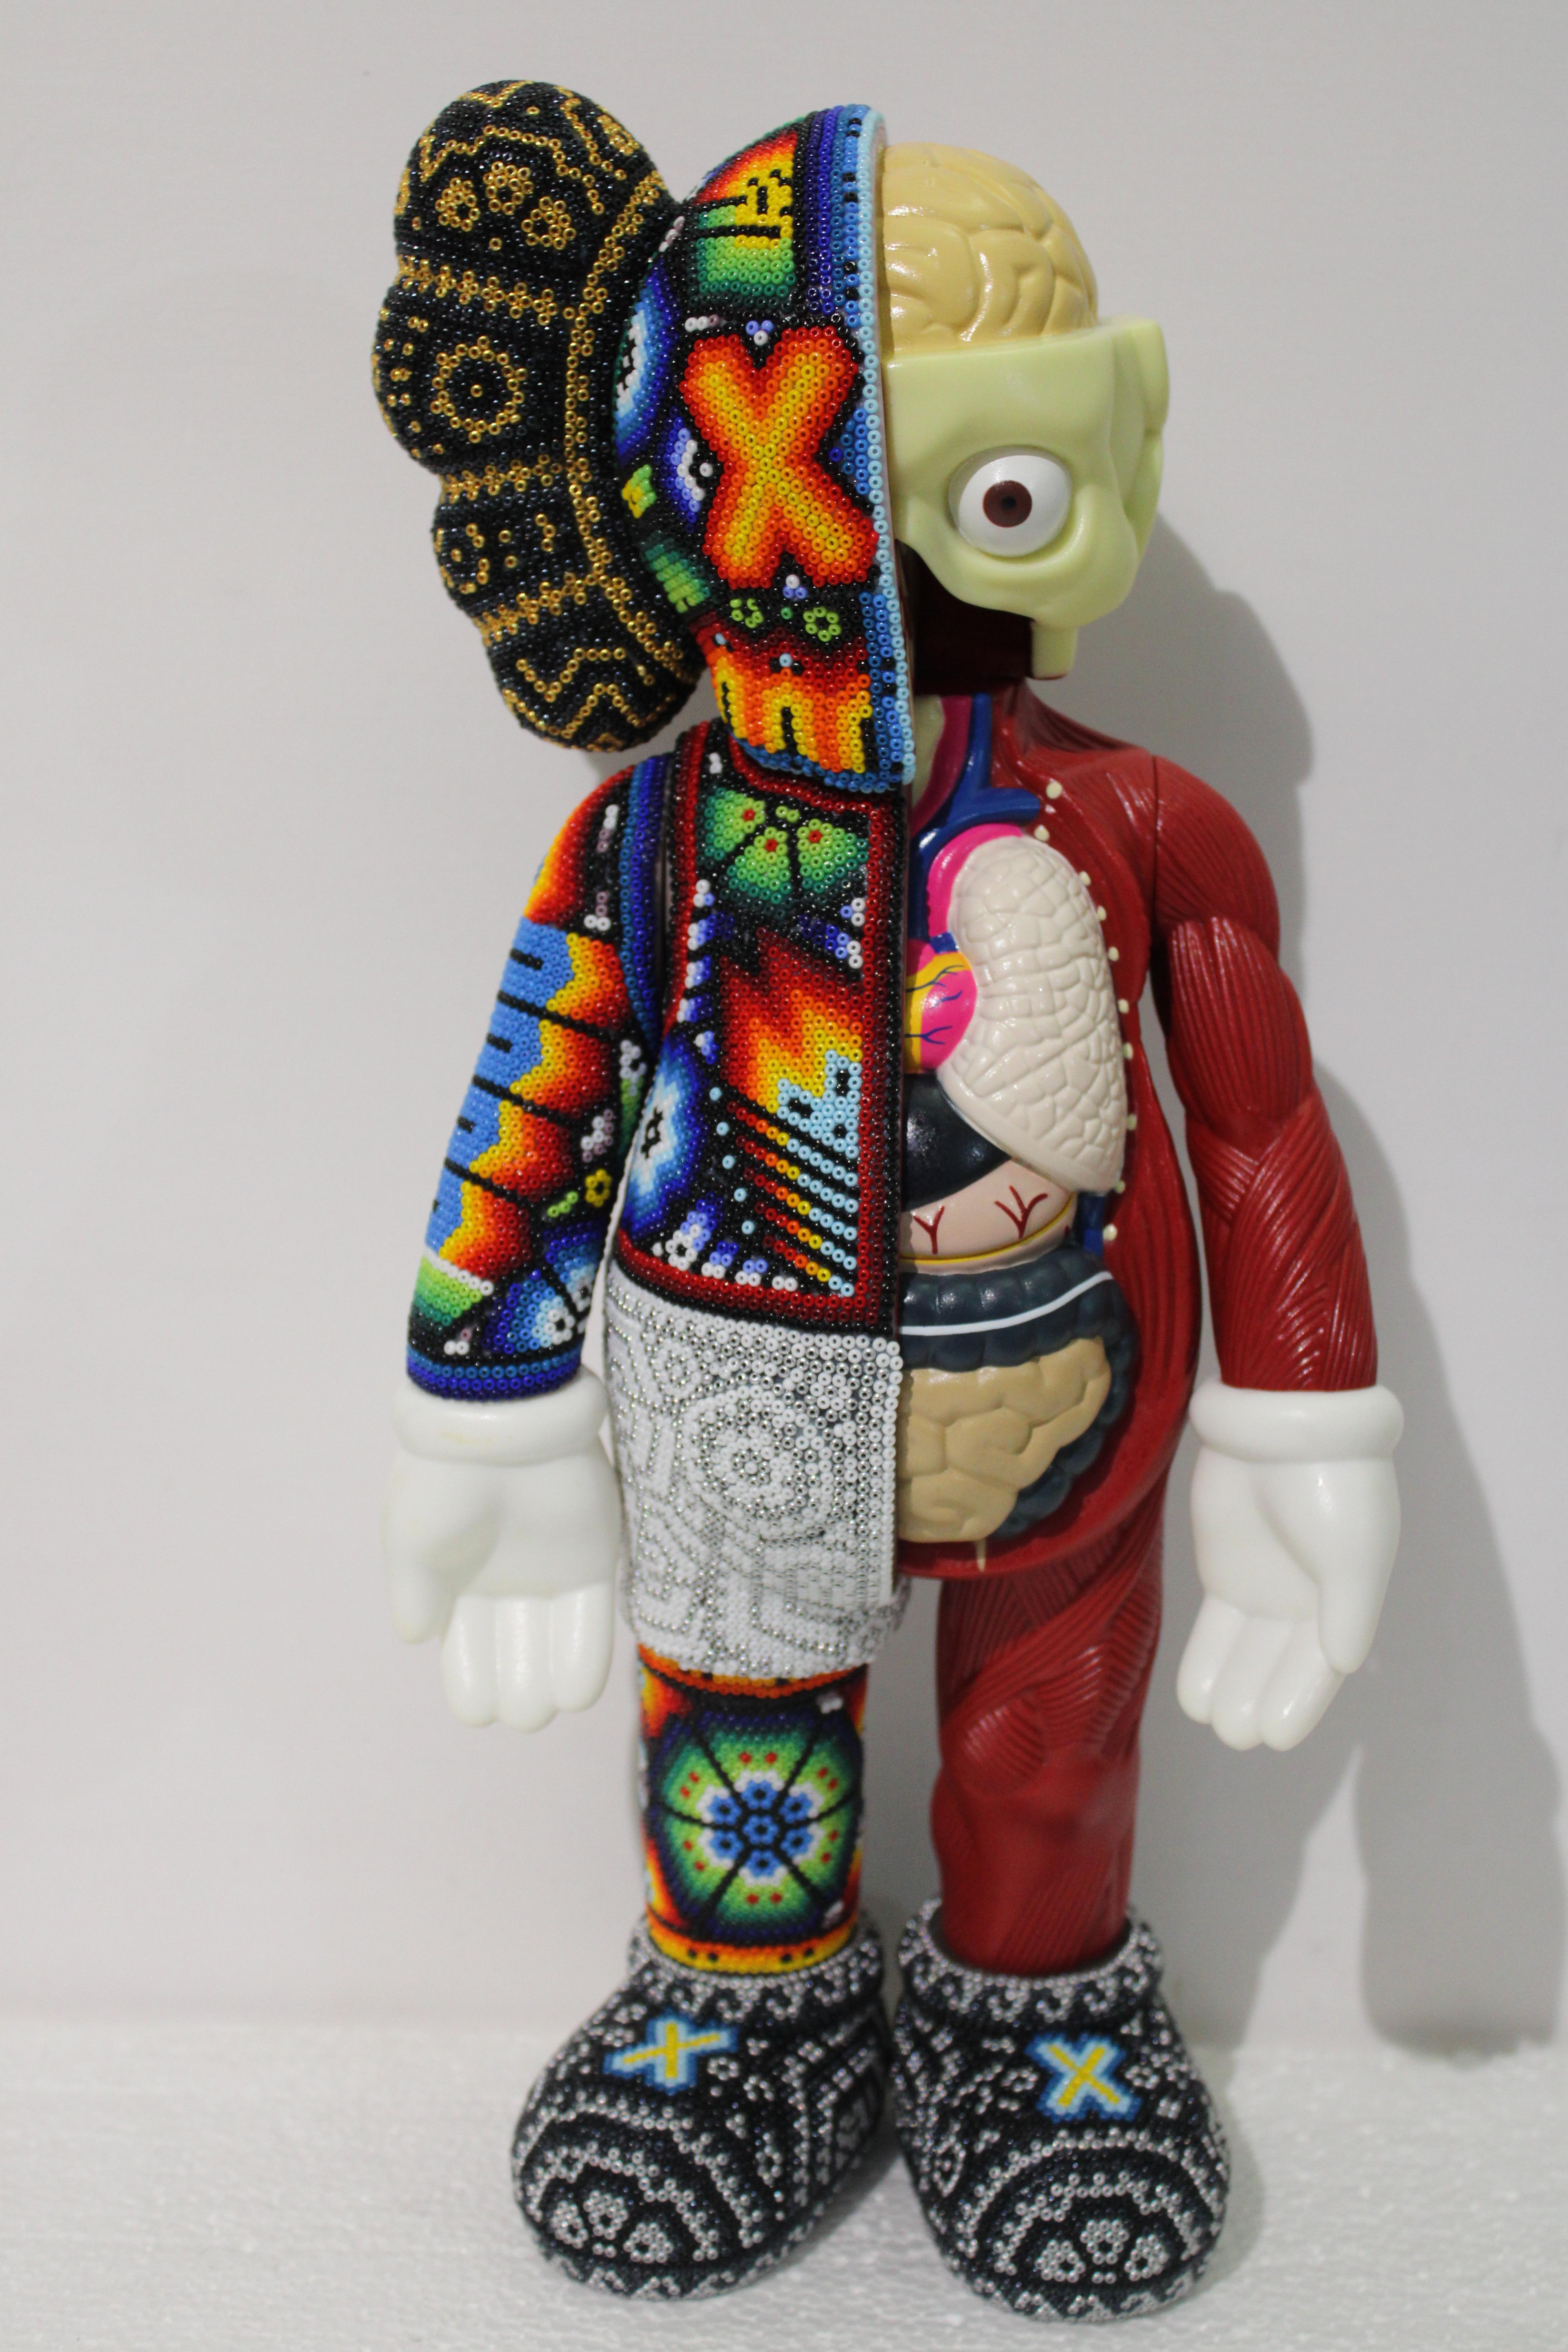 CHROMA aka Rick Wolfryd  Figurative Sculpture - "Dissected Man" from Huichol ALTERATIONS Series 